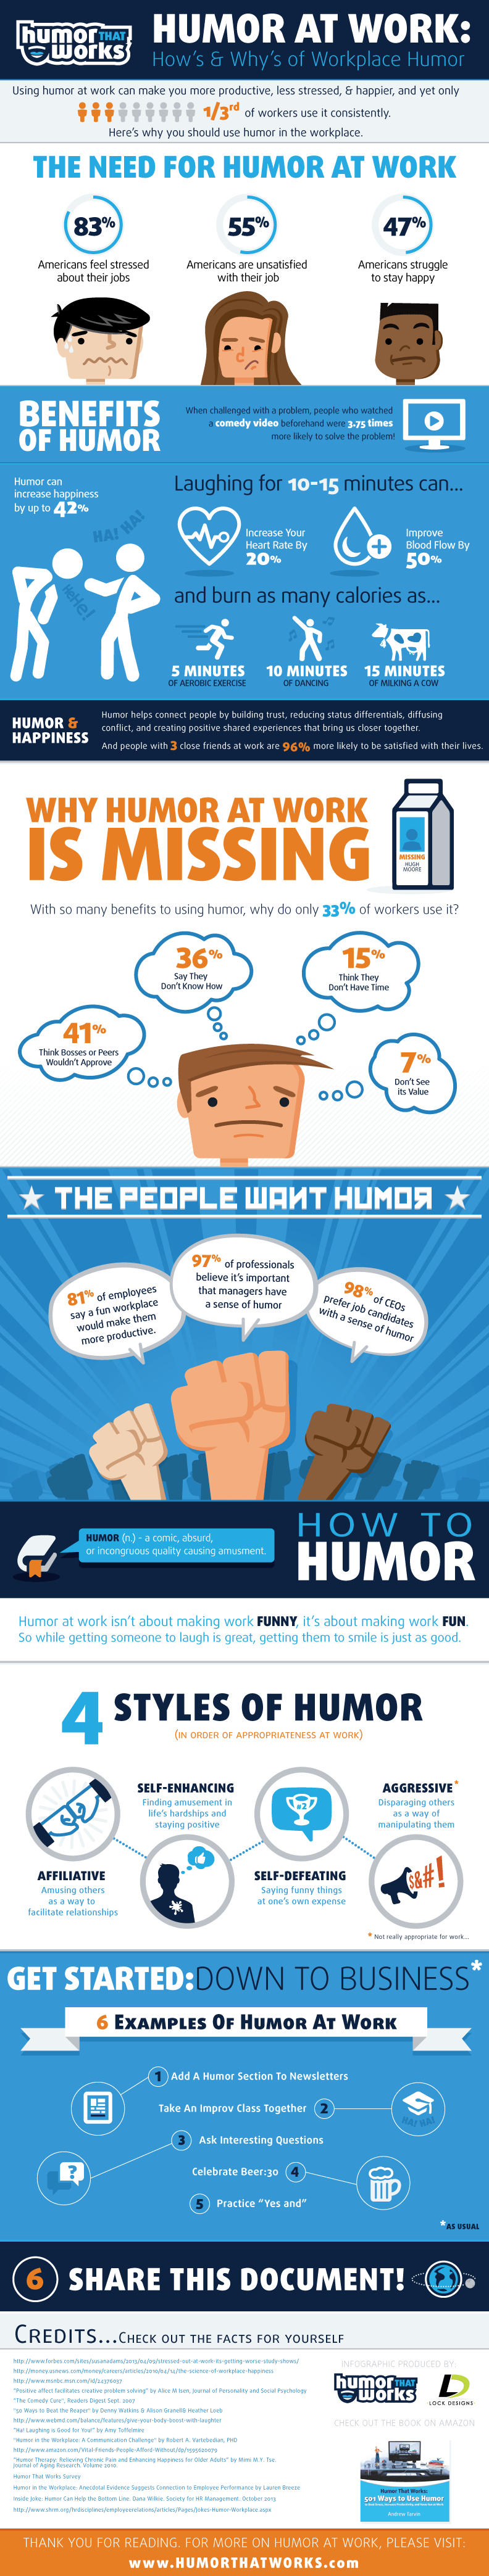 Humor at Work Infographic